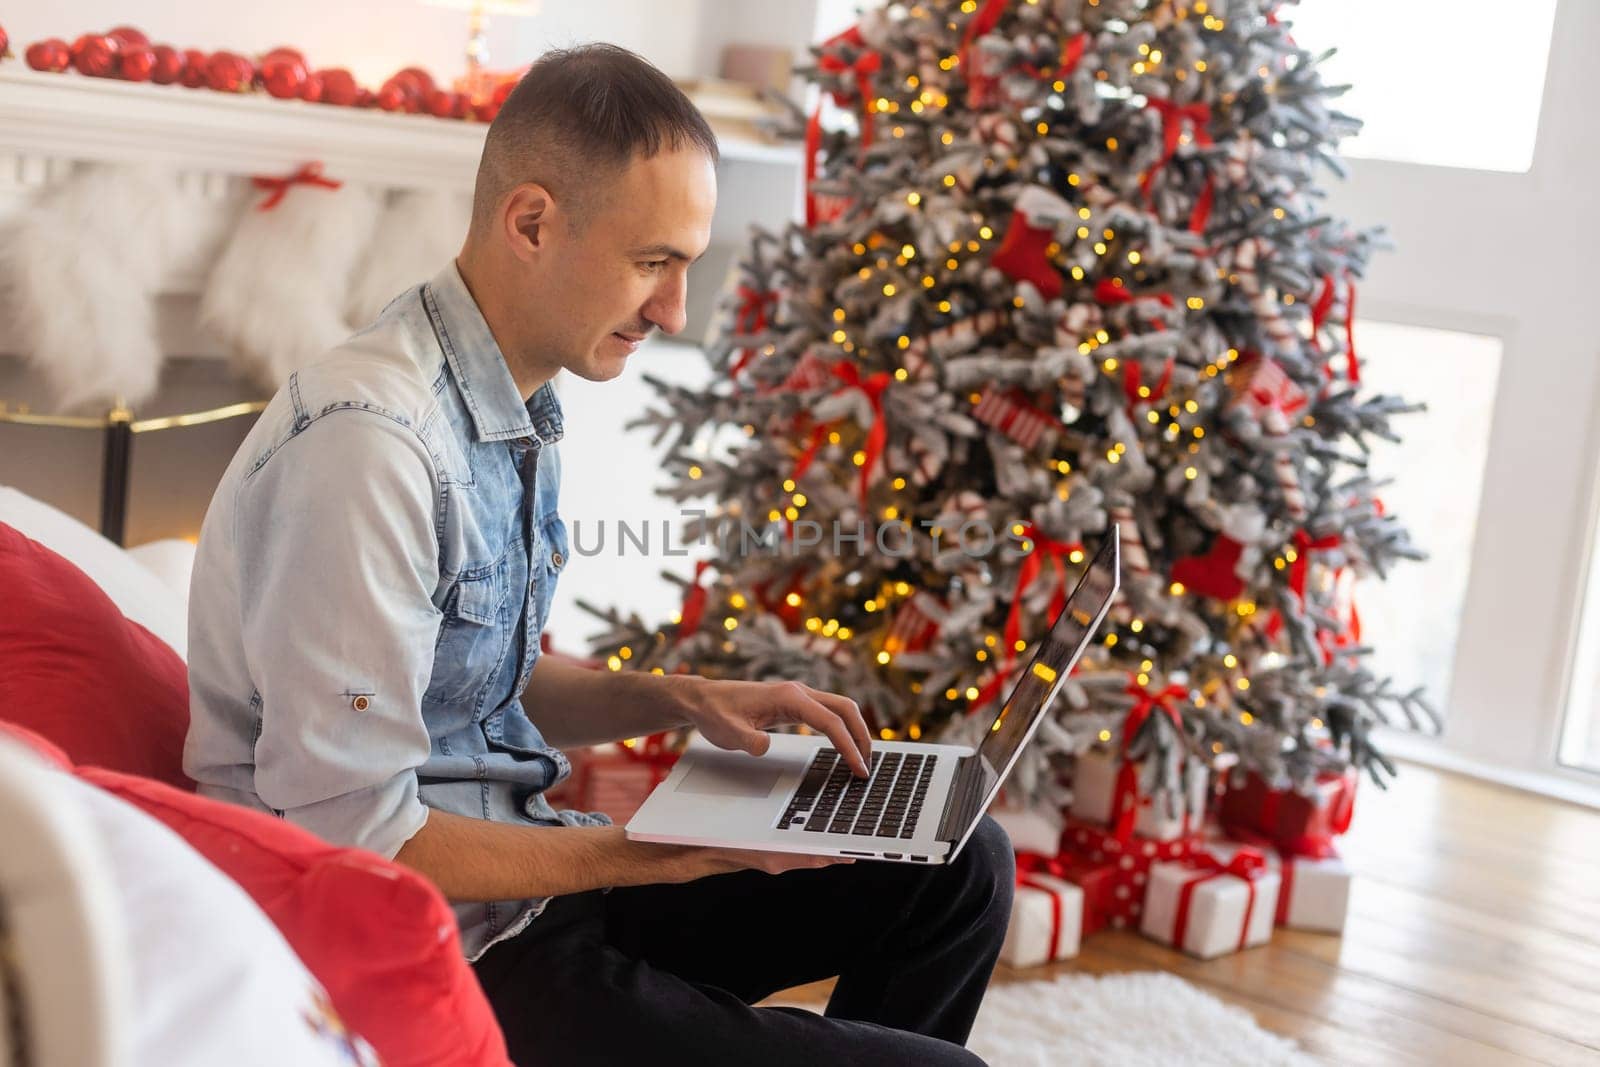 handsome man using laptop computer, talking on video chat call, shopping online. Christmas lights in the background.